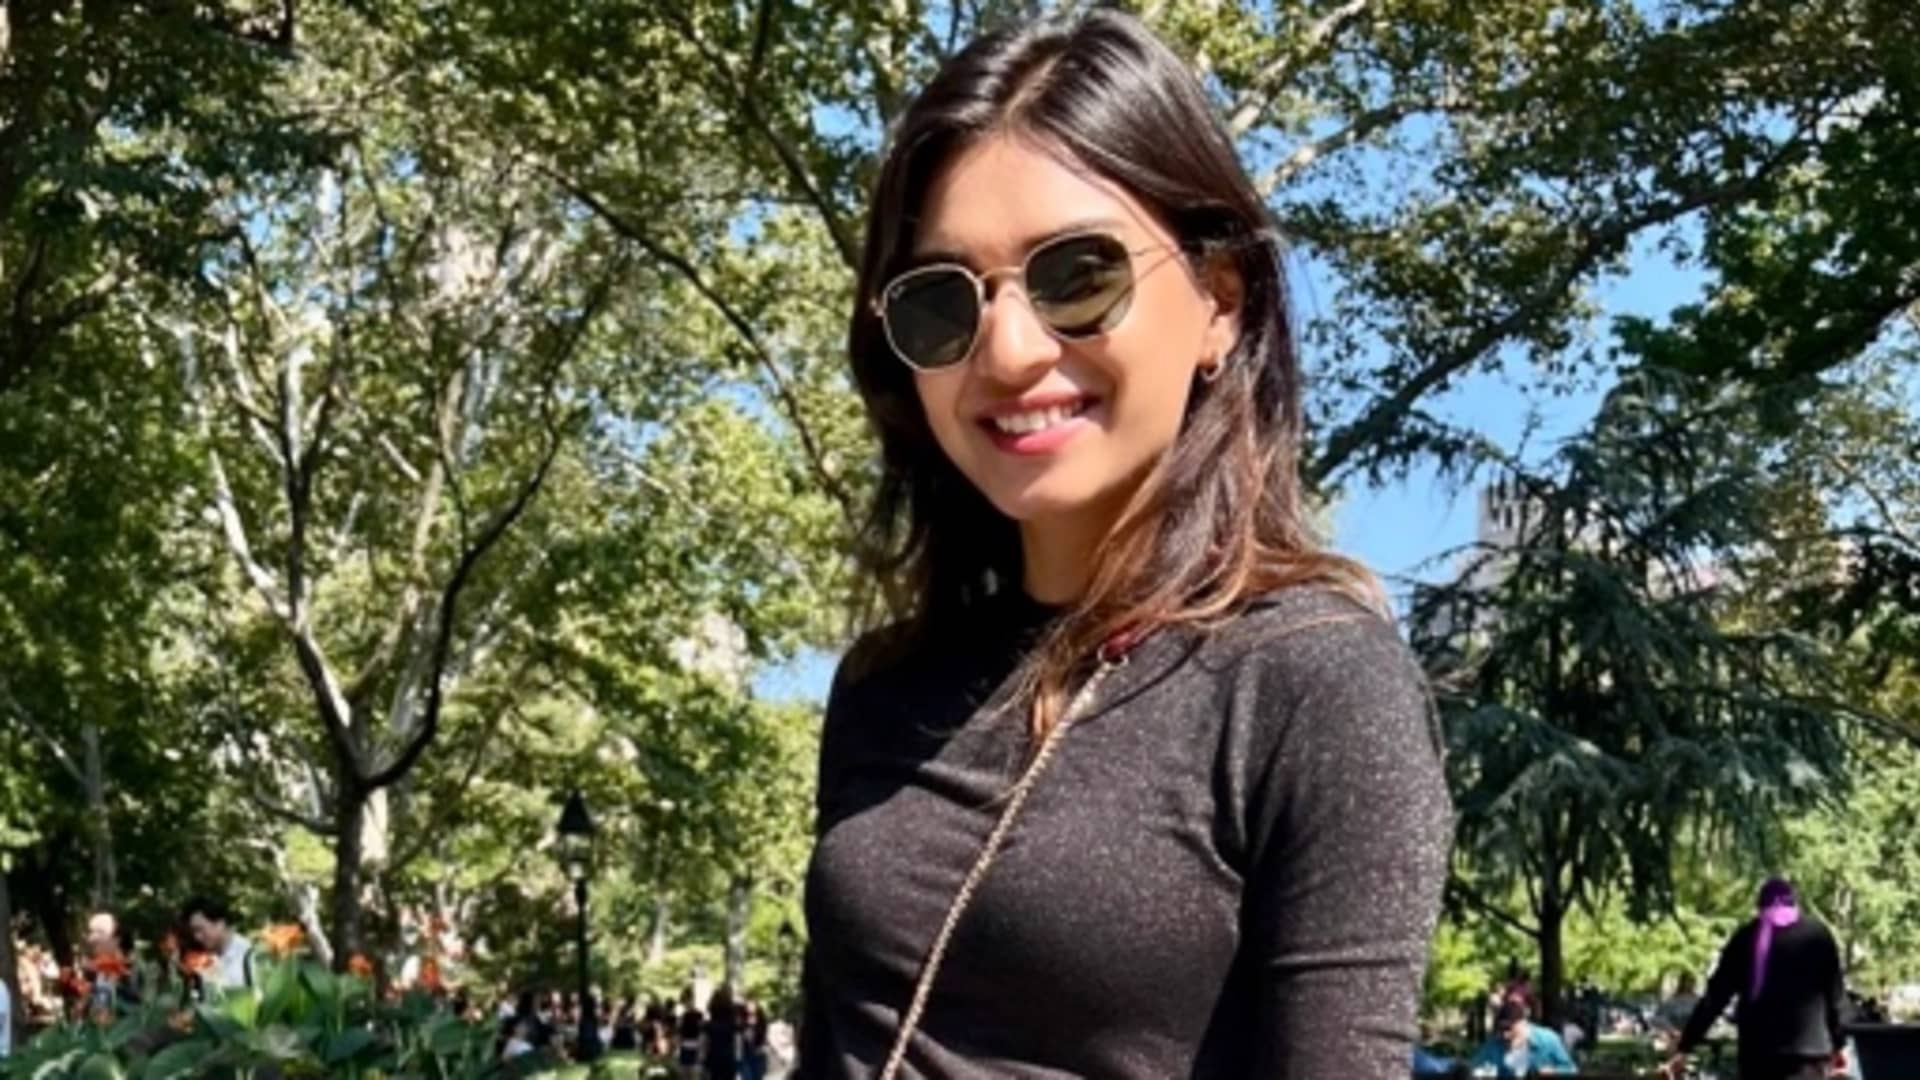 Sneha Rawal, 32, is a communications professional based in New York City.